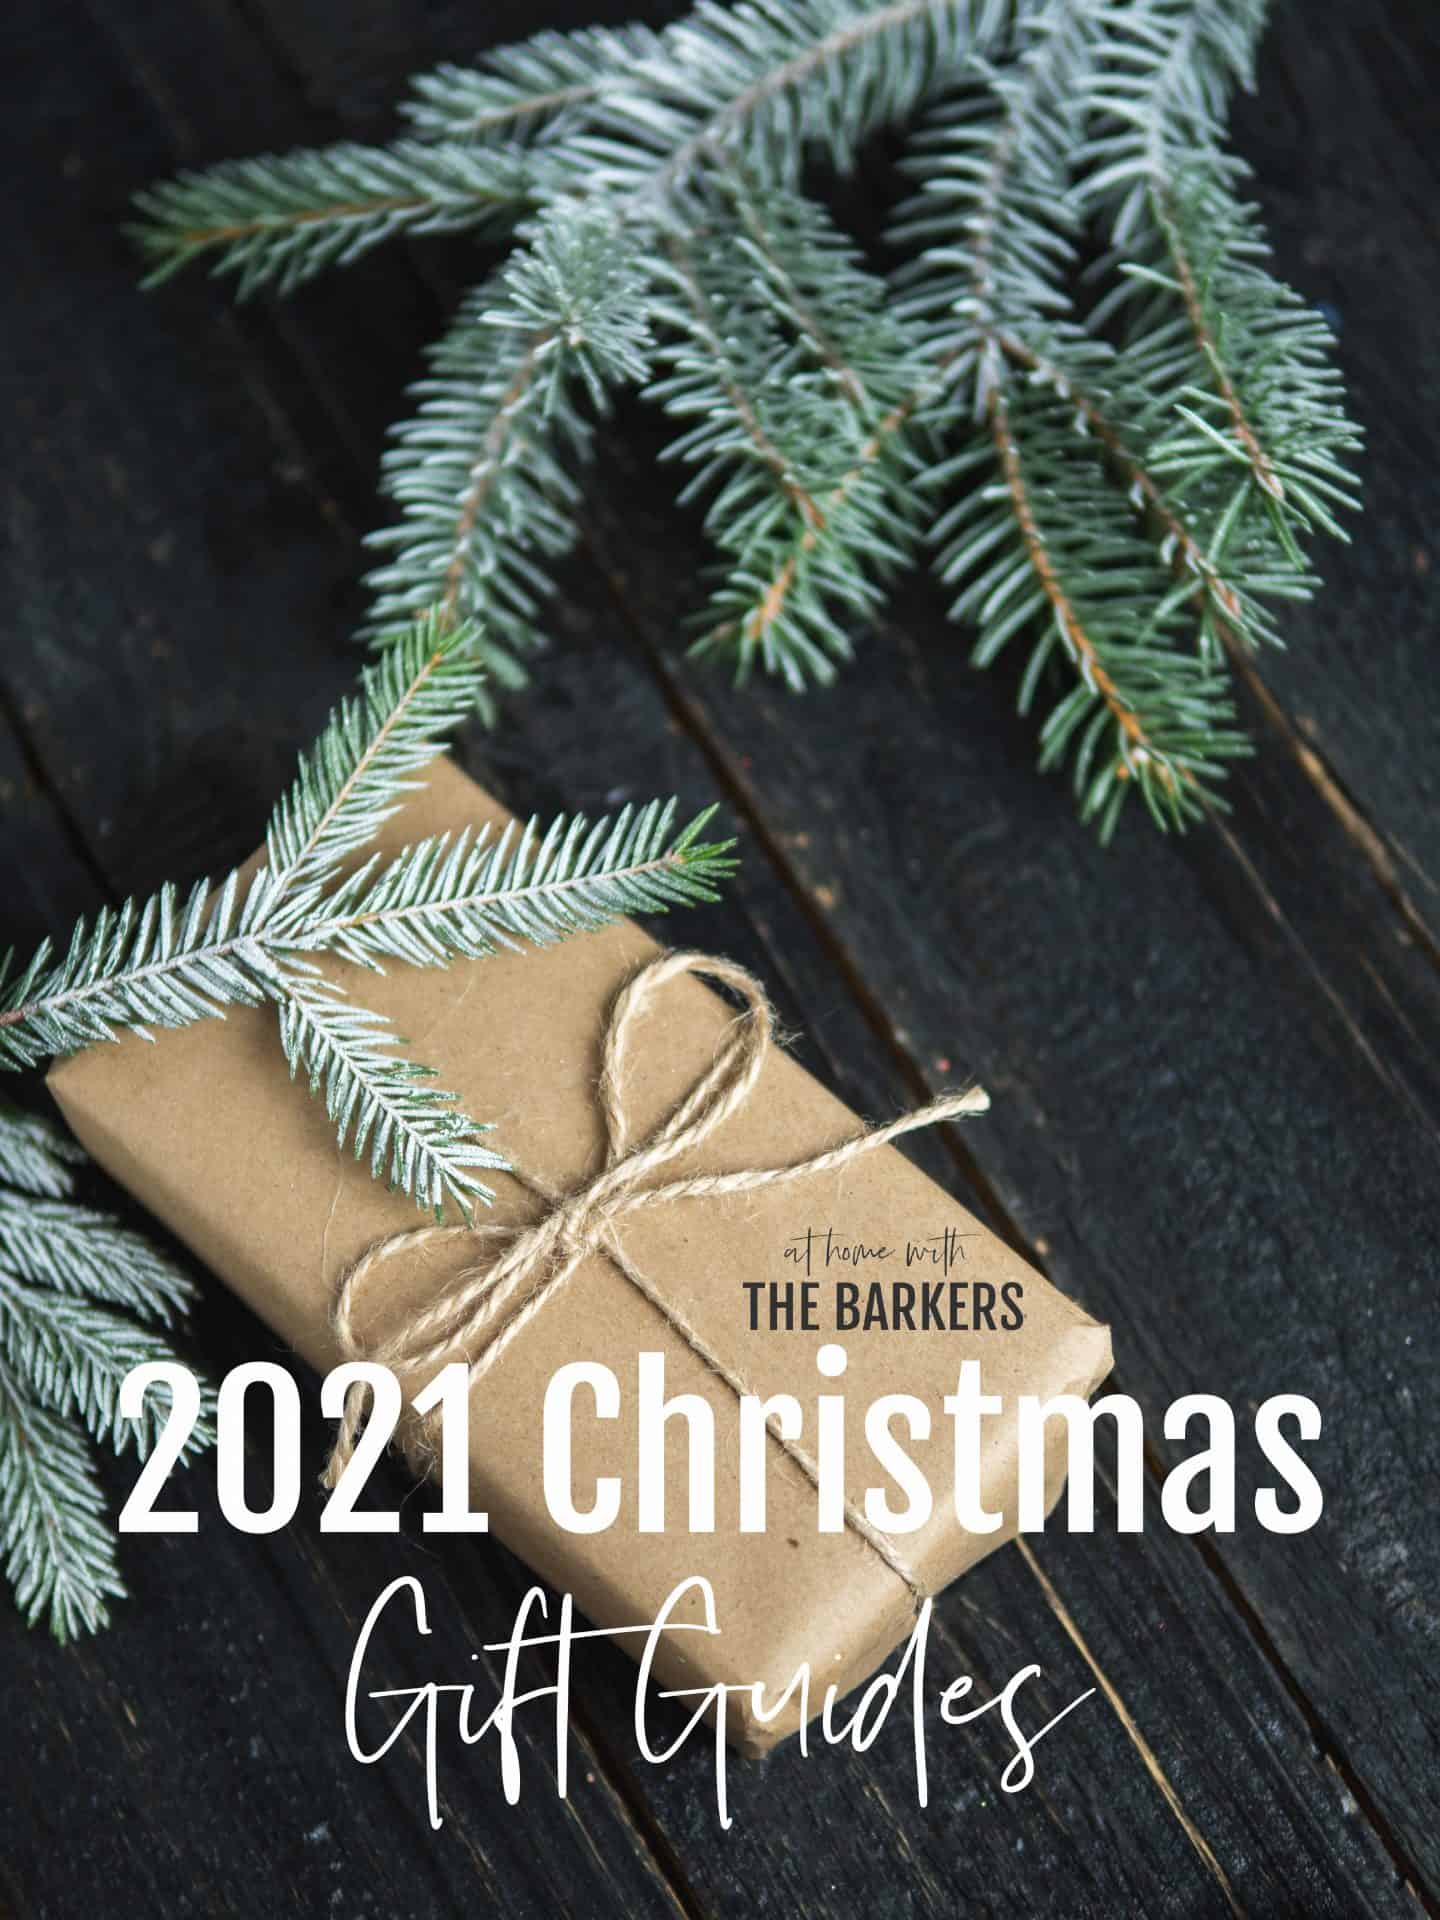 2021 Christmas gift guides graphic for At Home with the Barkers